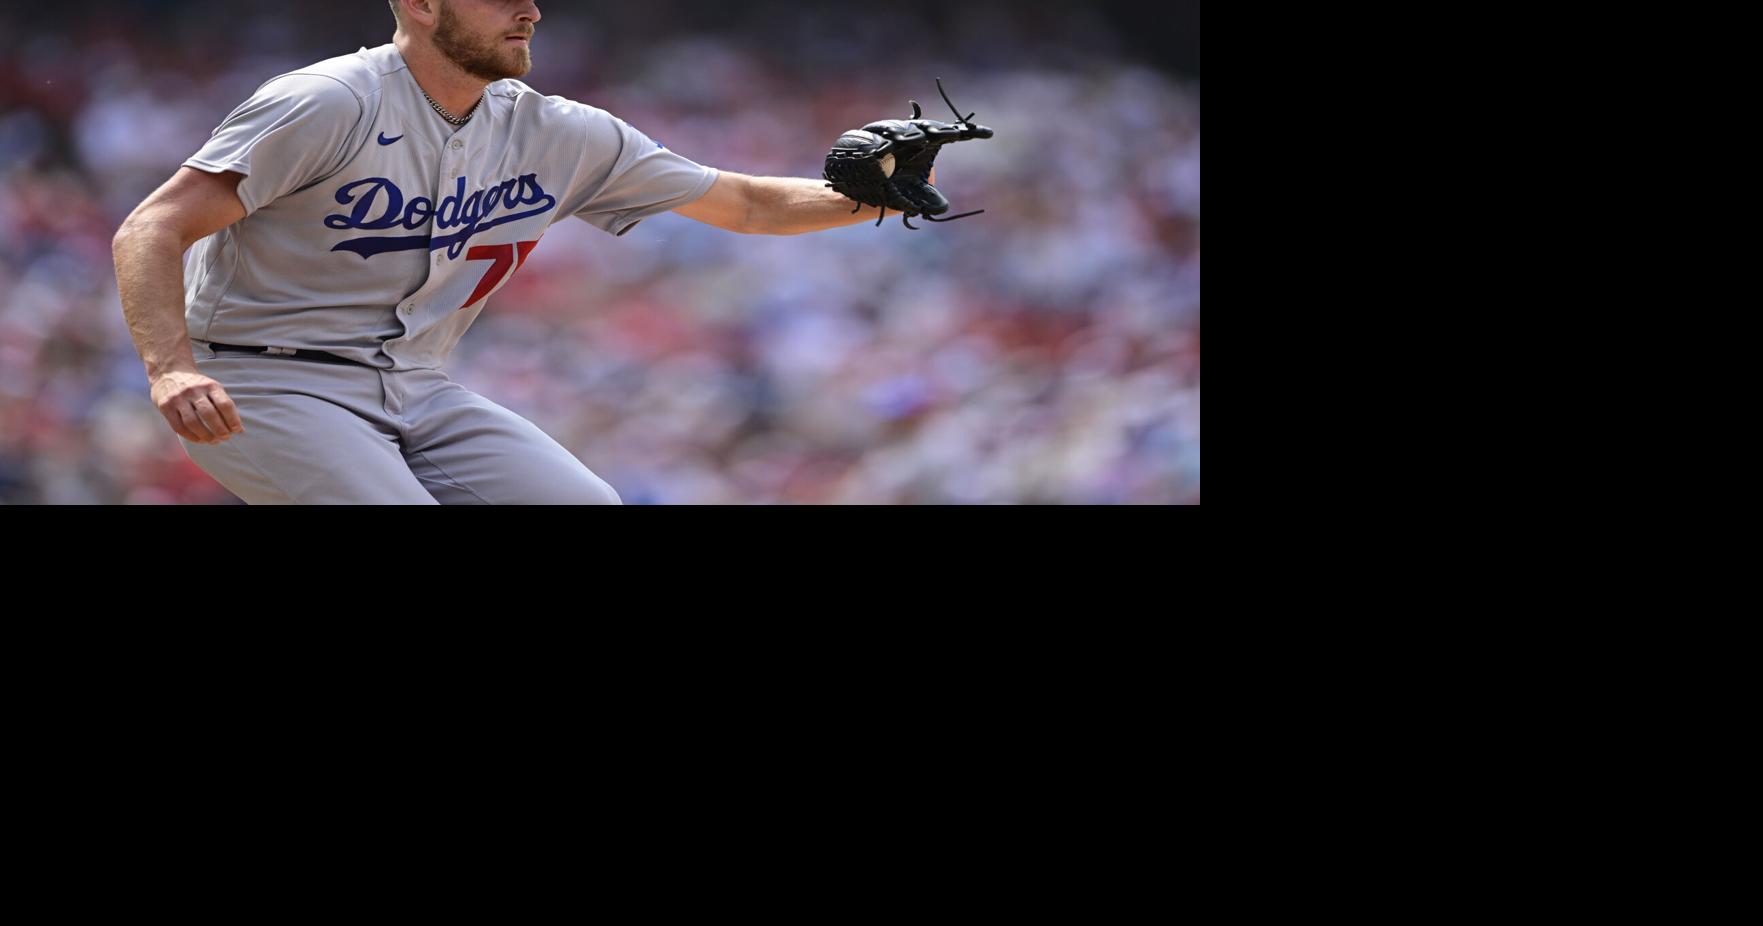 Dodgers second half promotions  The second half promos are live